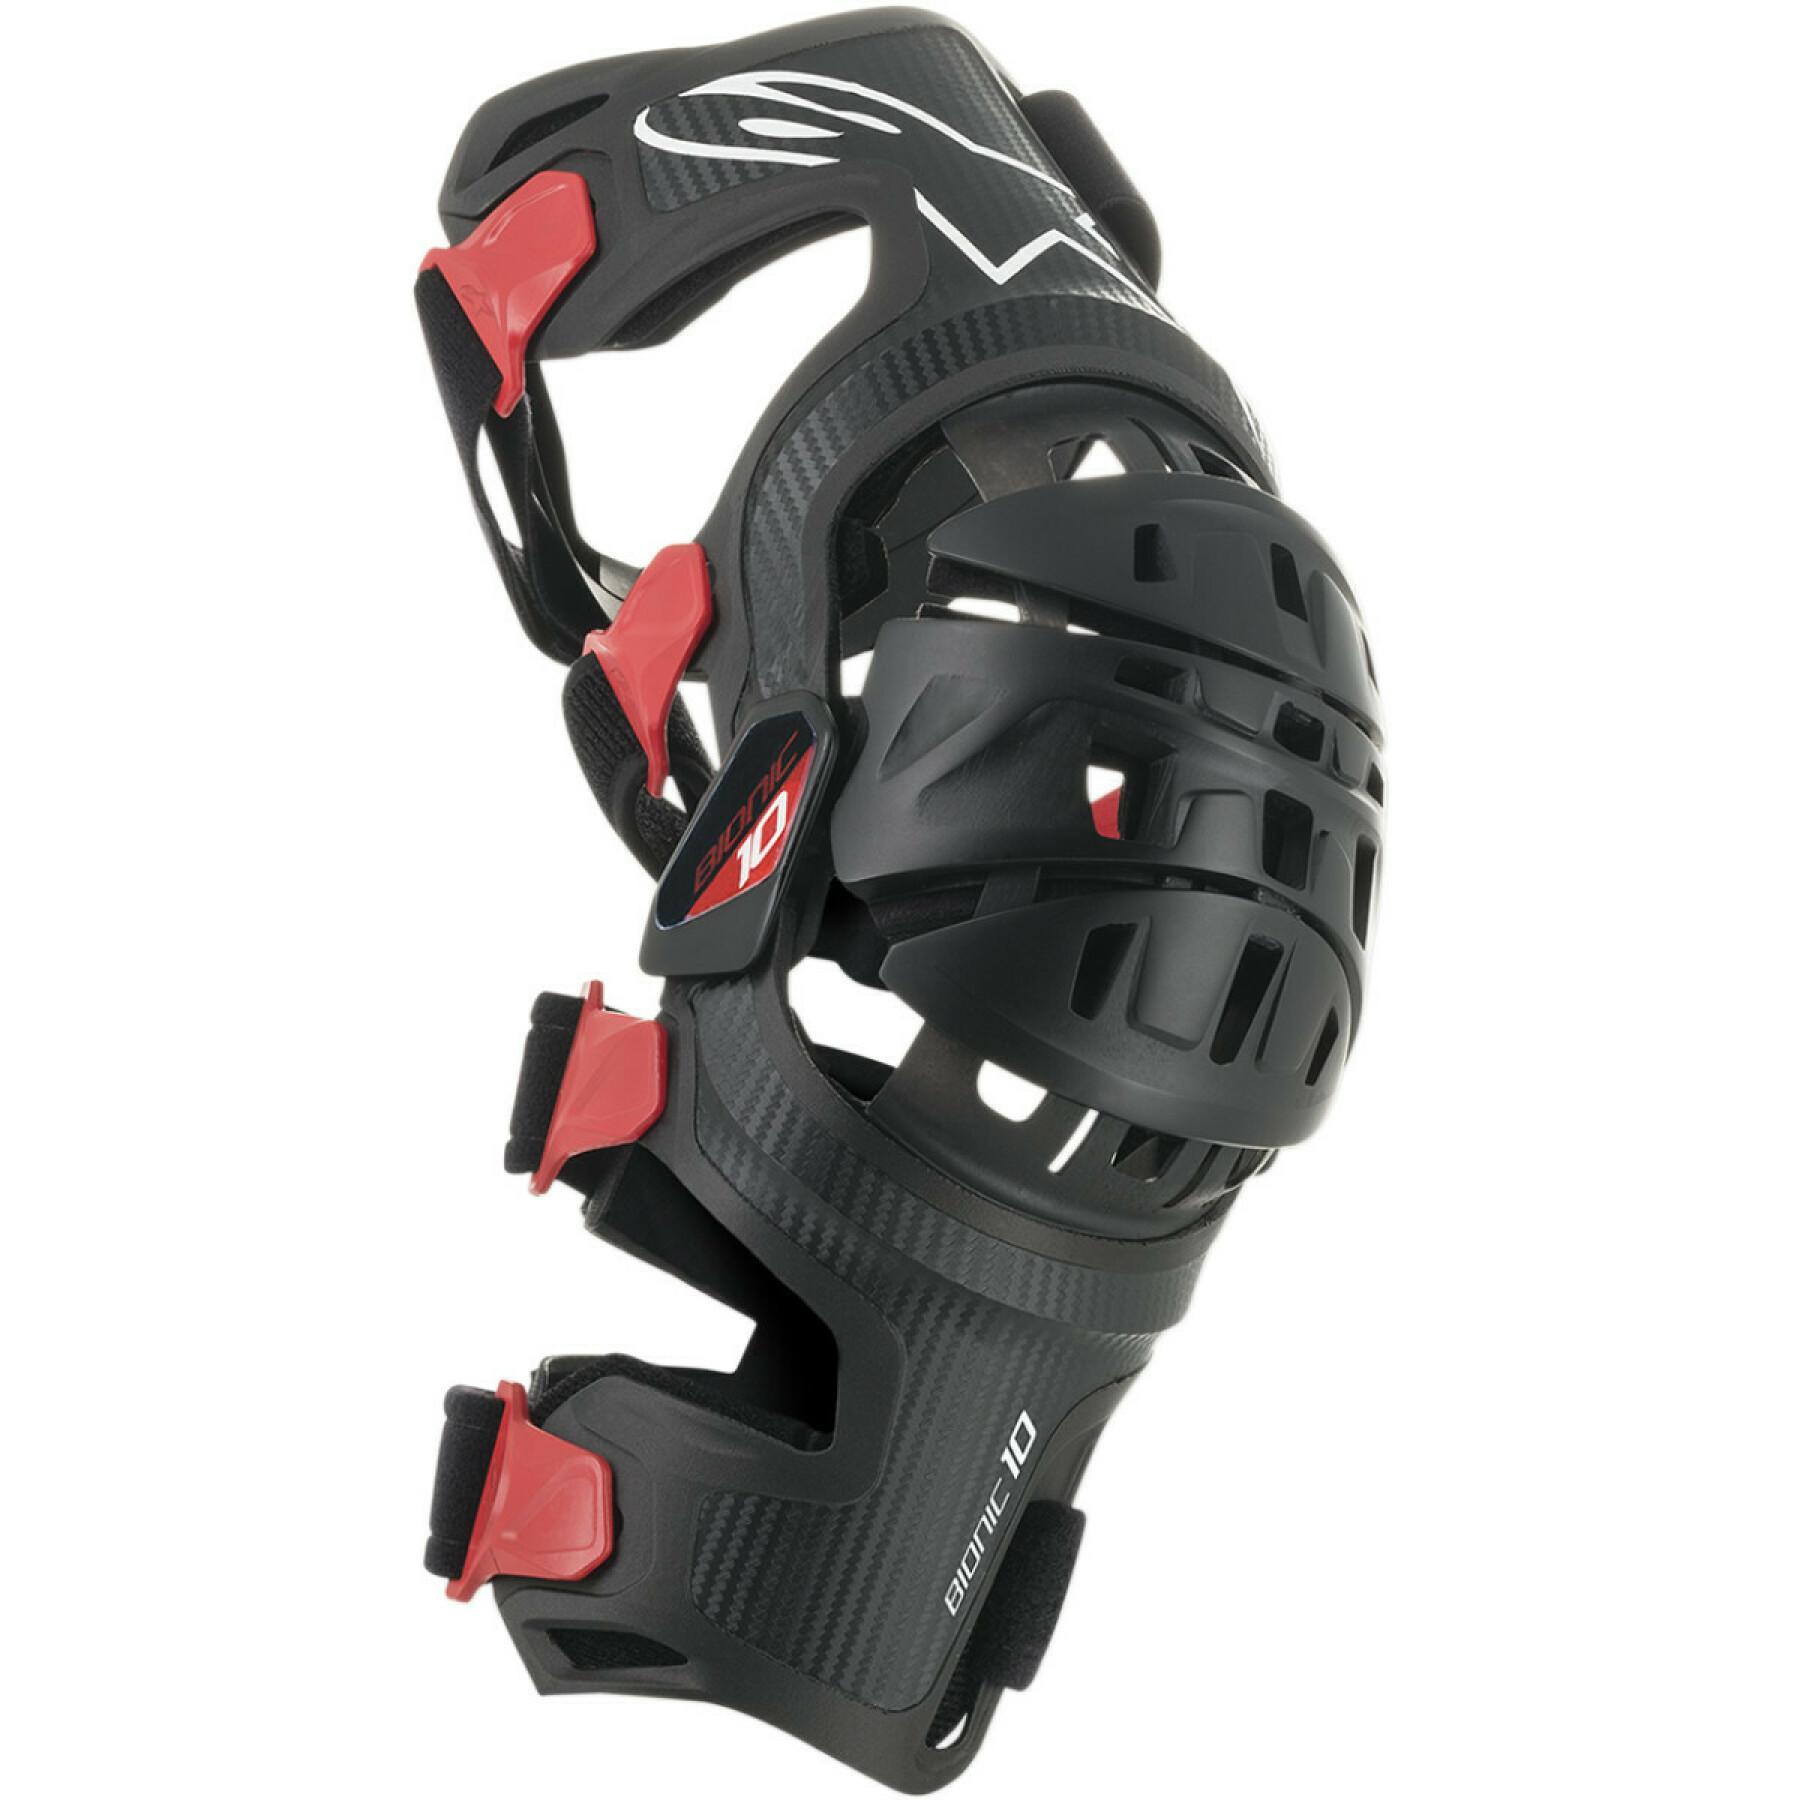 Knee support for motorcycle cross left Alpinestars bionic-10 carbon